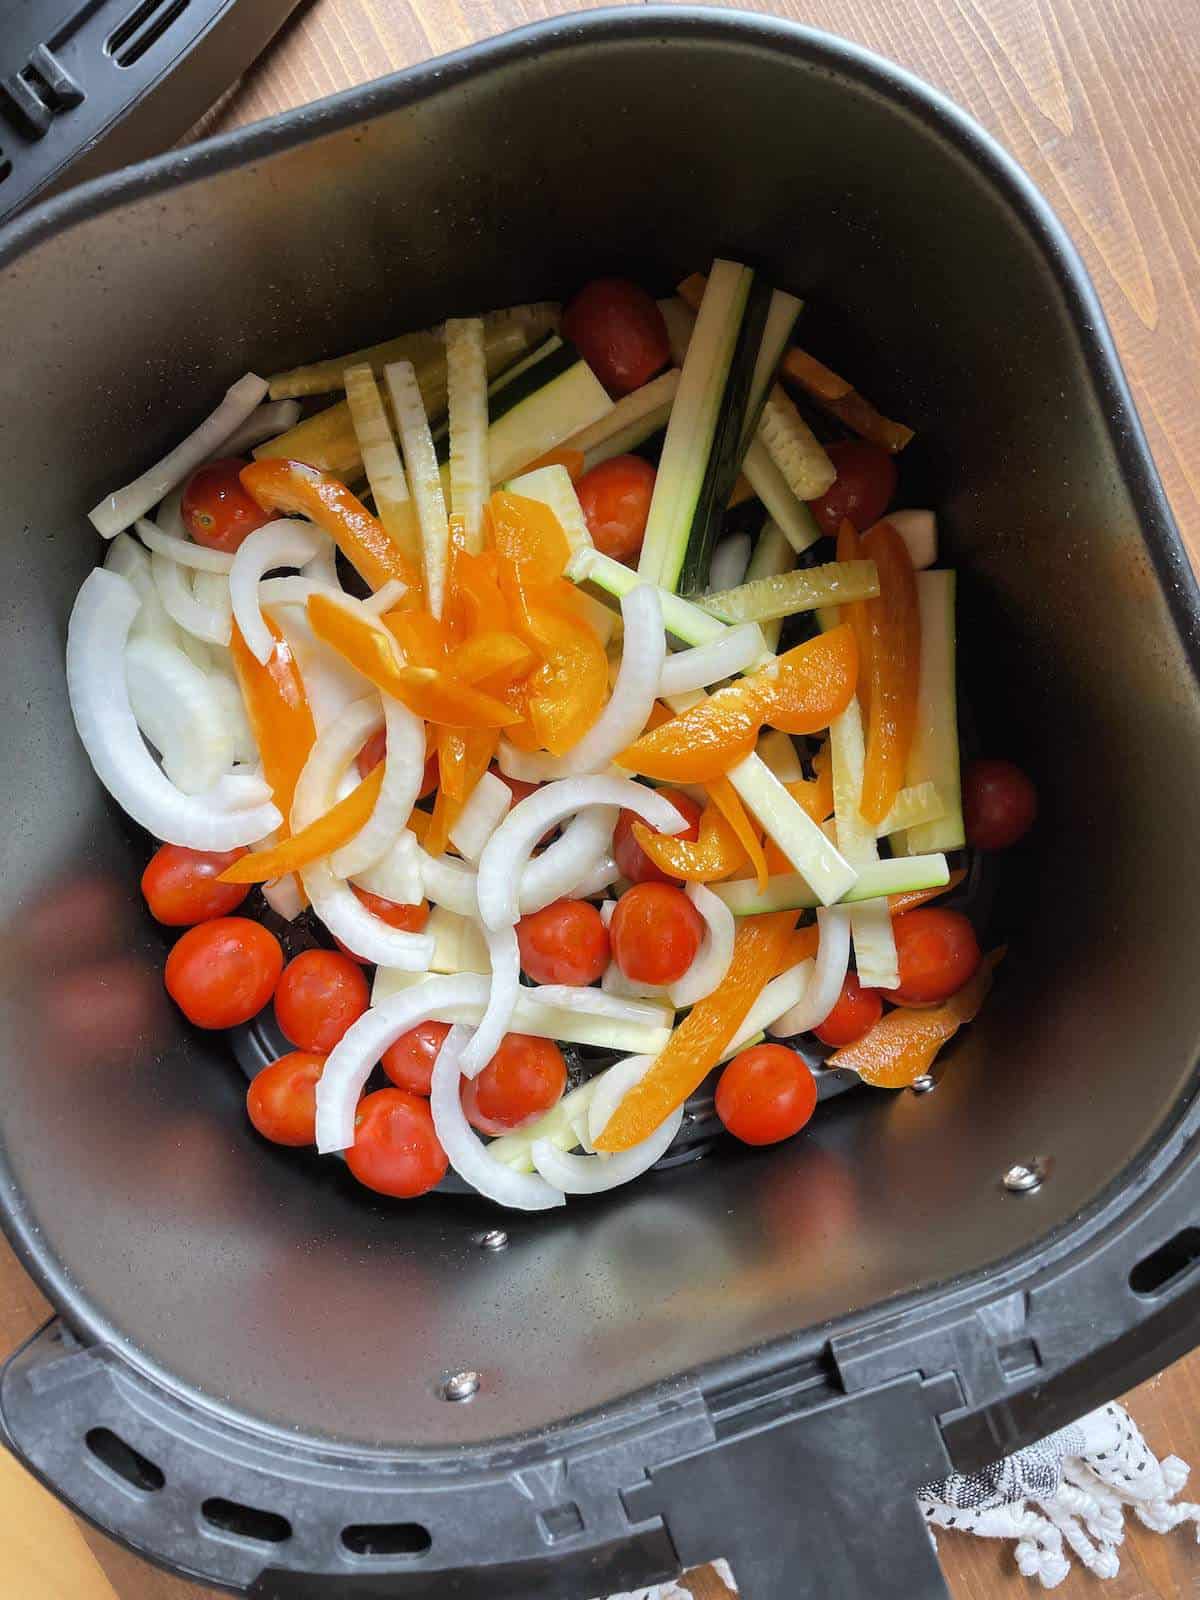 Peppers, onions, zucchini, and tomatoes cooking in an air fryer basket.